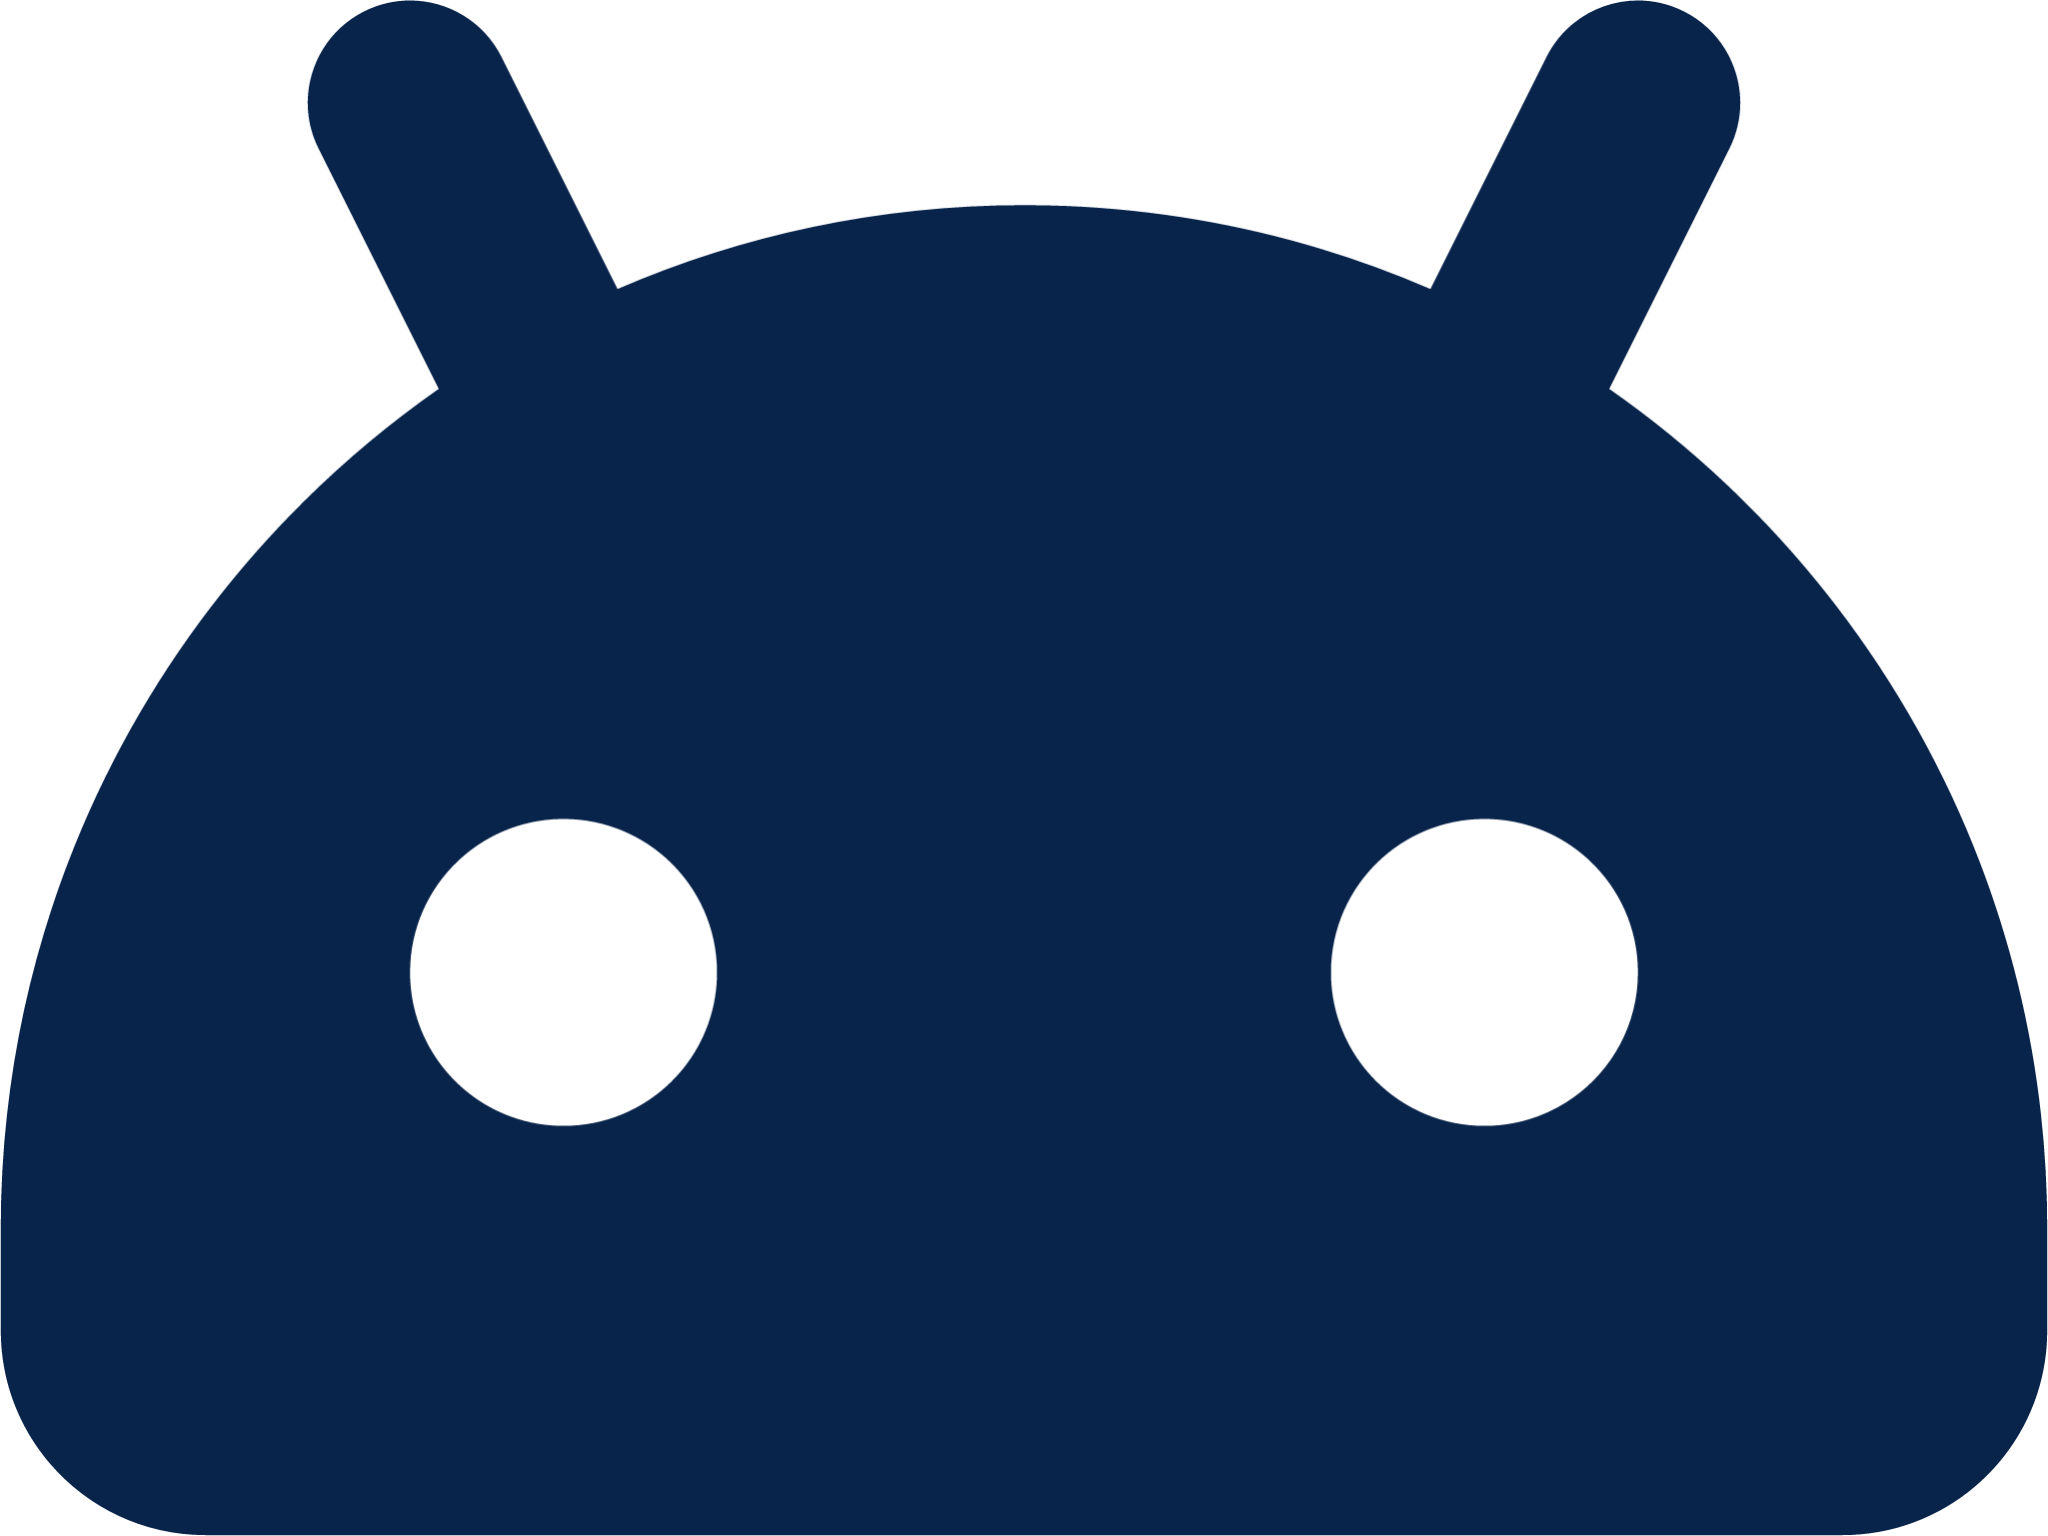 Android 2 fill logo icon